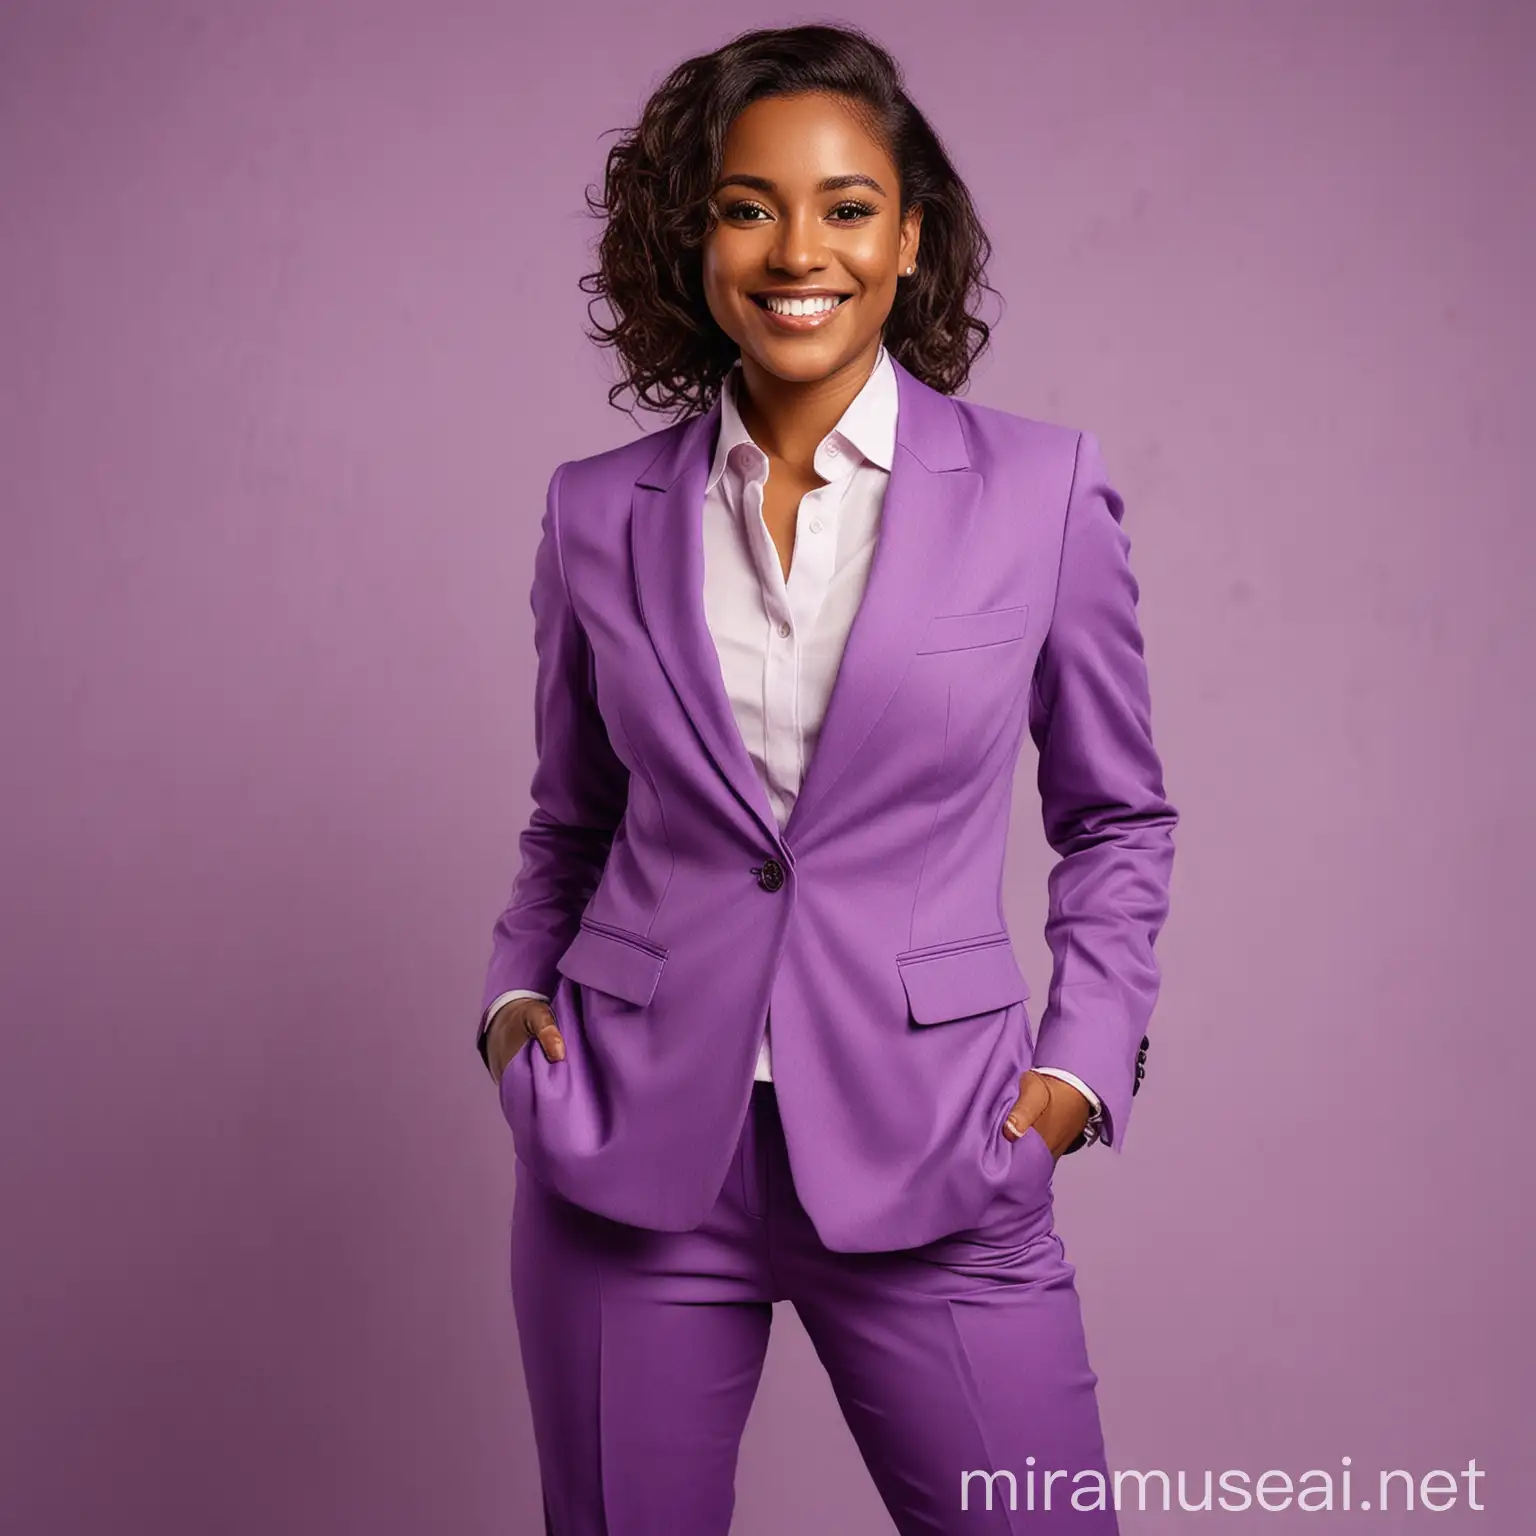 Image of a professional brown skin lady, in purple suit smiling and standing straight